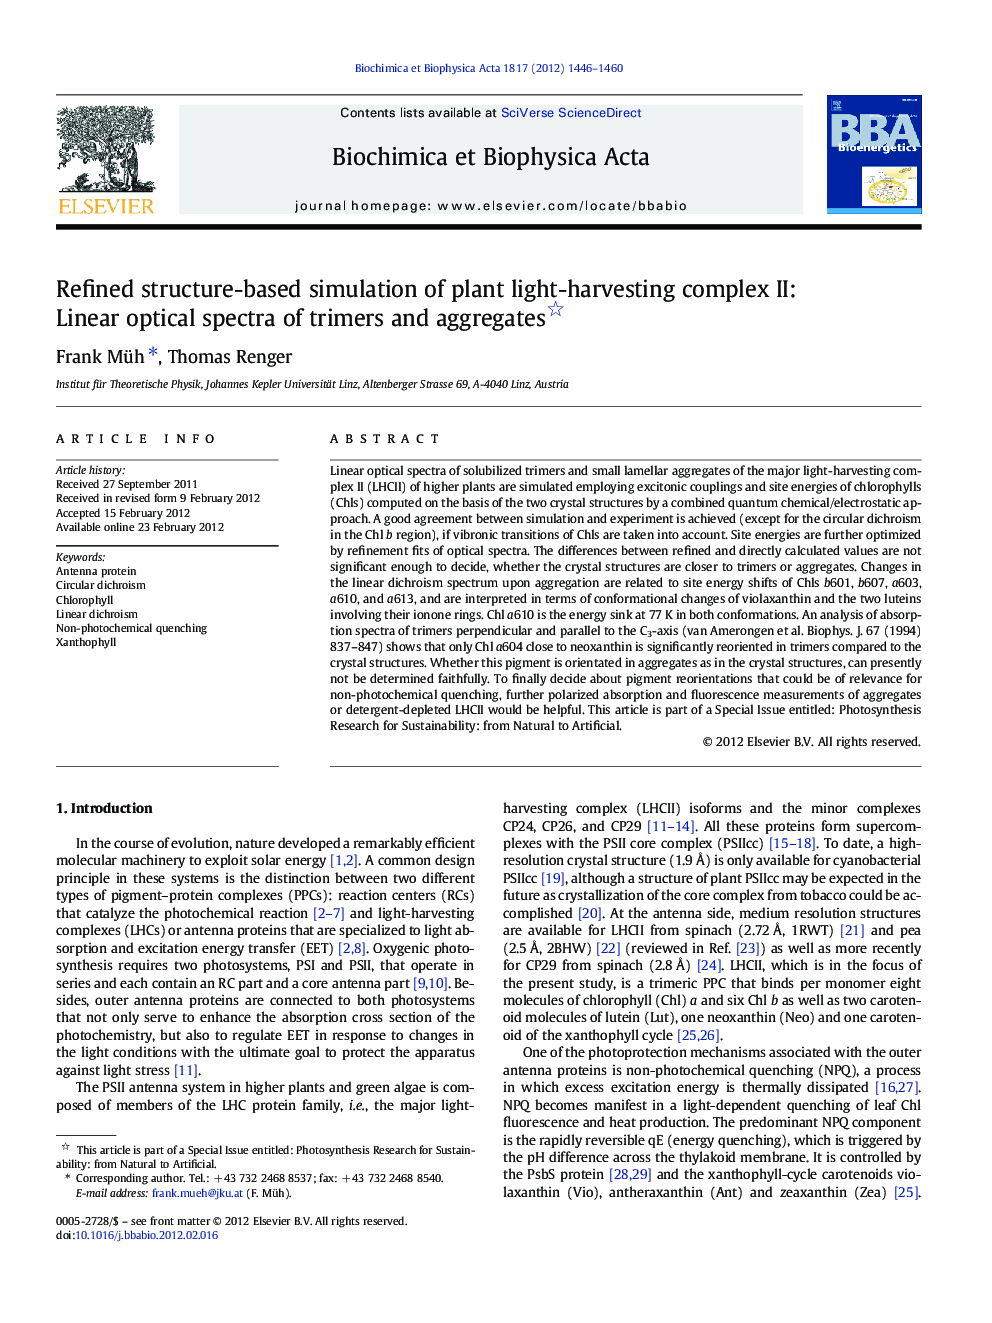 Refined structure-based simulation of plant light-harvesting complex II: Linear optical spectra of trimers and aggregates 